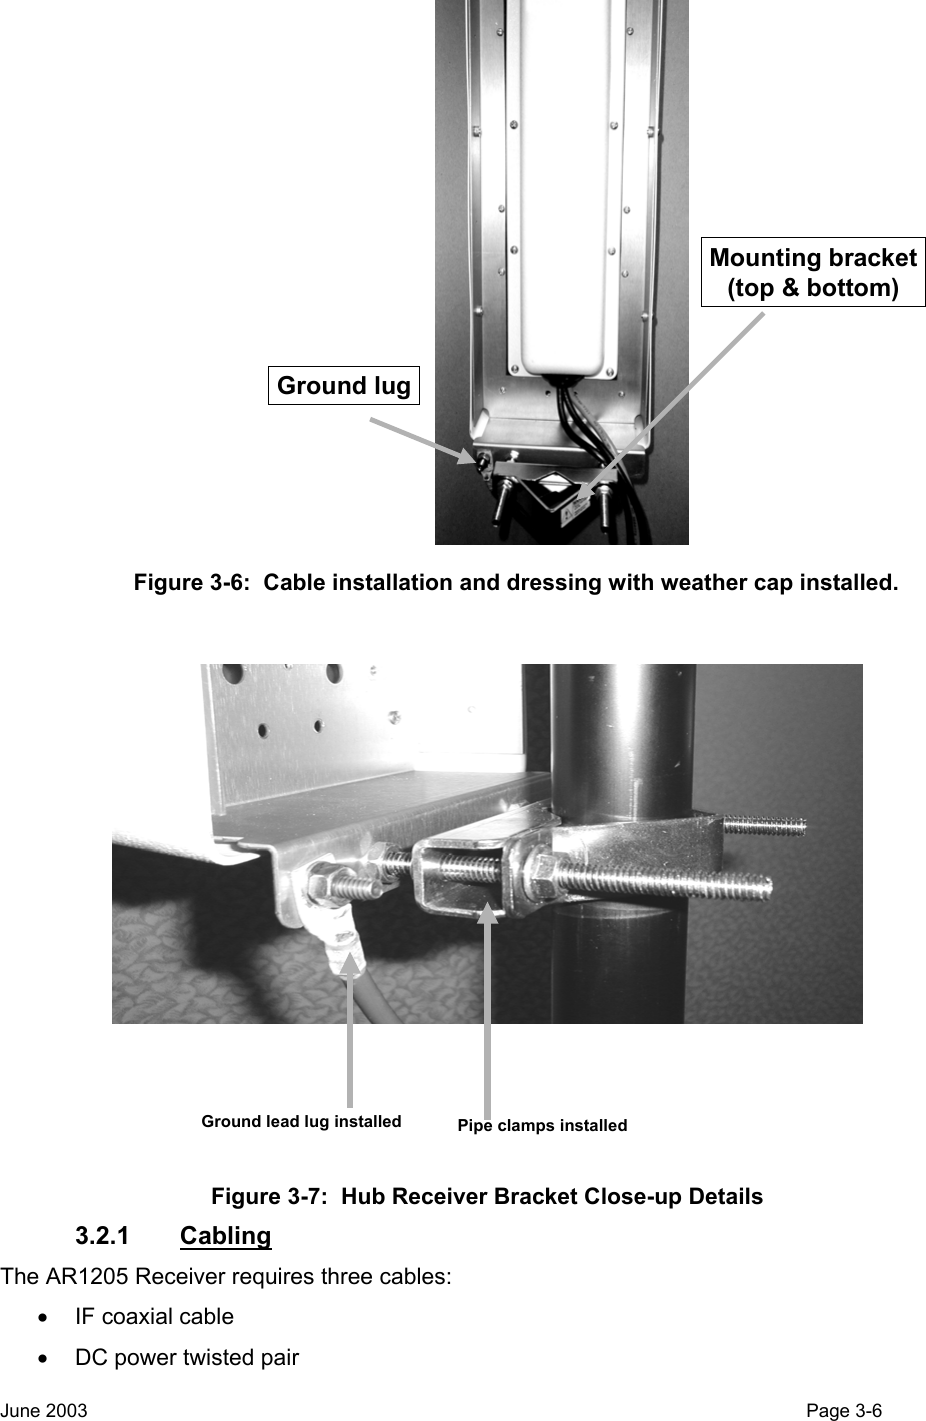                        Ground lugMounting bracket(top &amp; bottom)          Figure 3-6:  Cable installation and dressing with weather cap installed. Ground lead lug installed Pipe clamps installed Figure 3-7:  Hub Receiver Bracket Close-up Details 3.2.1 Cabling The AR1205 Receiver requires three cables: •  IF coaxial cable  •  DC power twisted pair June 2003                                                                                                                                          Page 3-6  